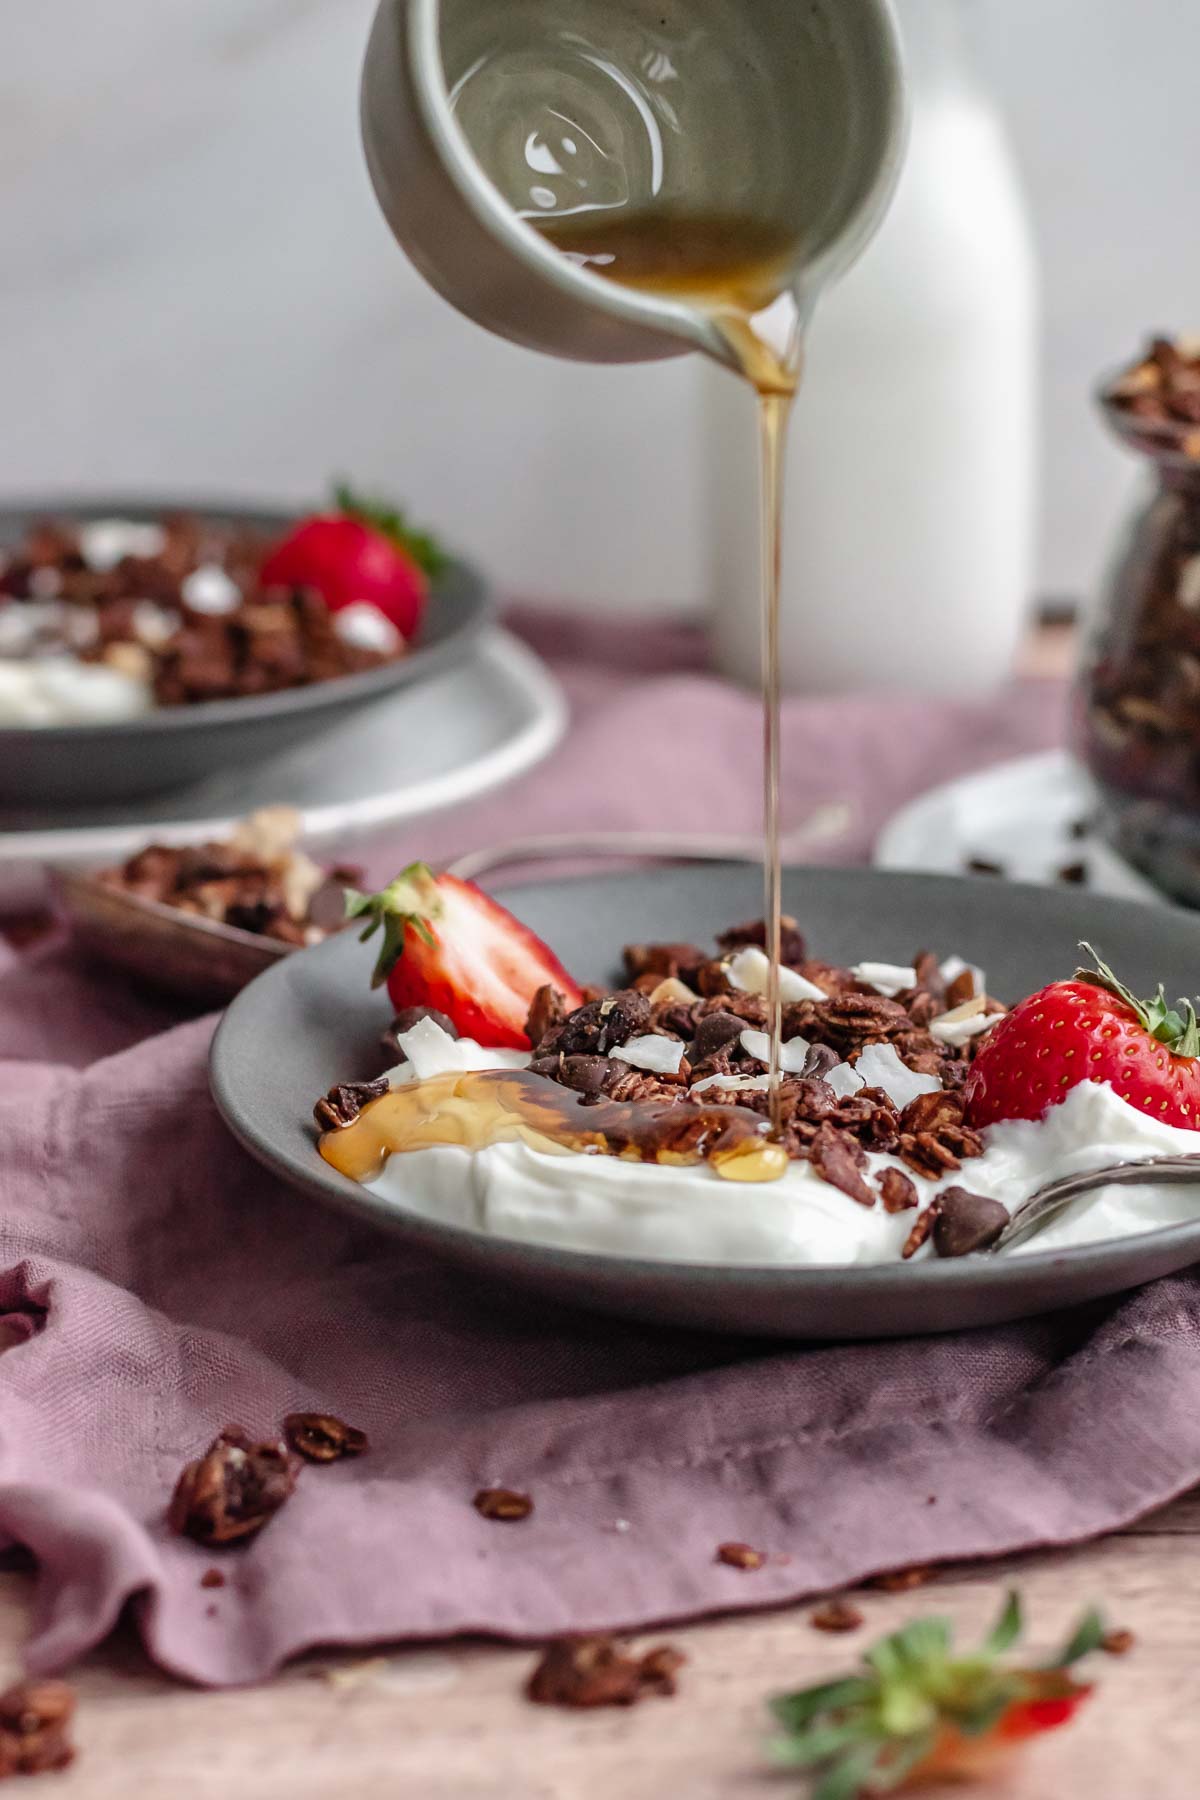 Maple syrup pouring over yogurt and chocolate granola in a bowl.